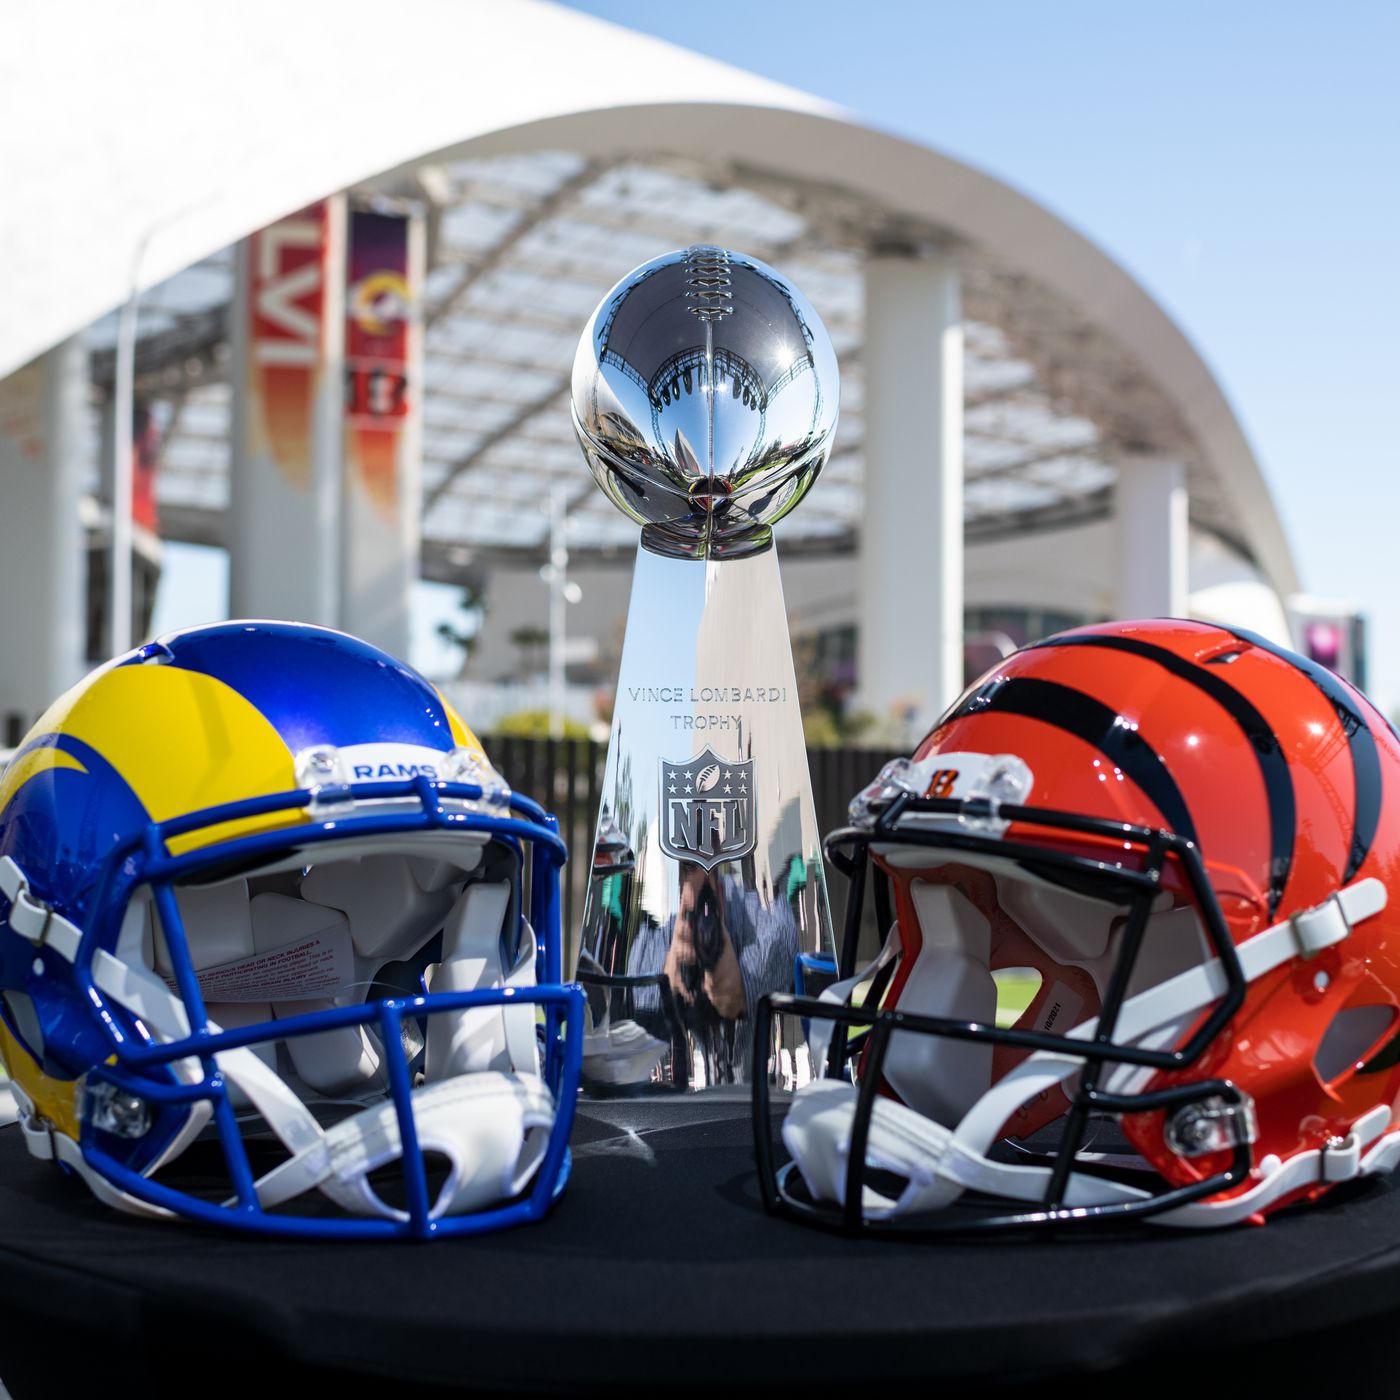 Super Bowl 2022 Preview: Who will win, Bengals or Rams? - Dawgs By